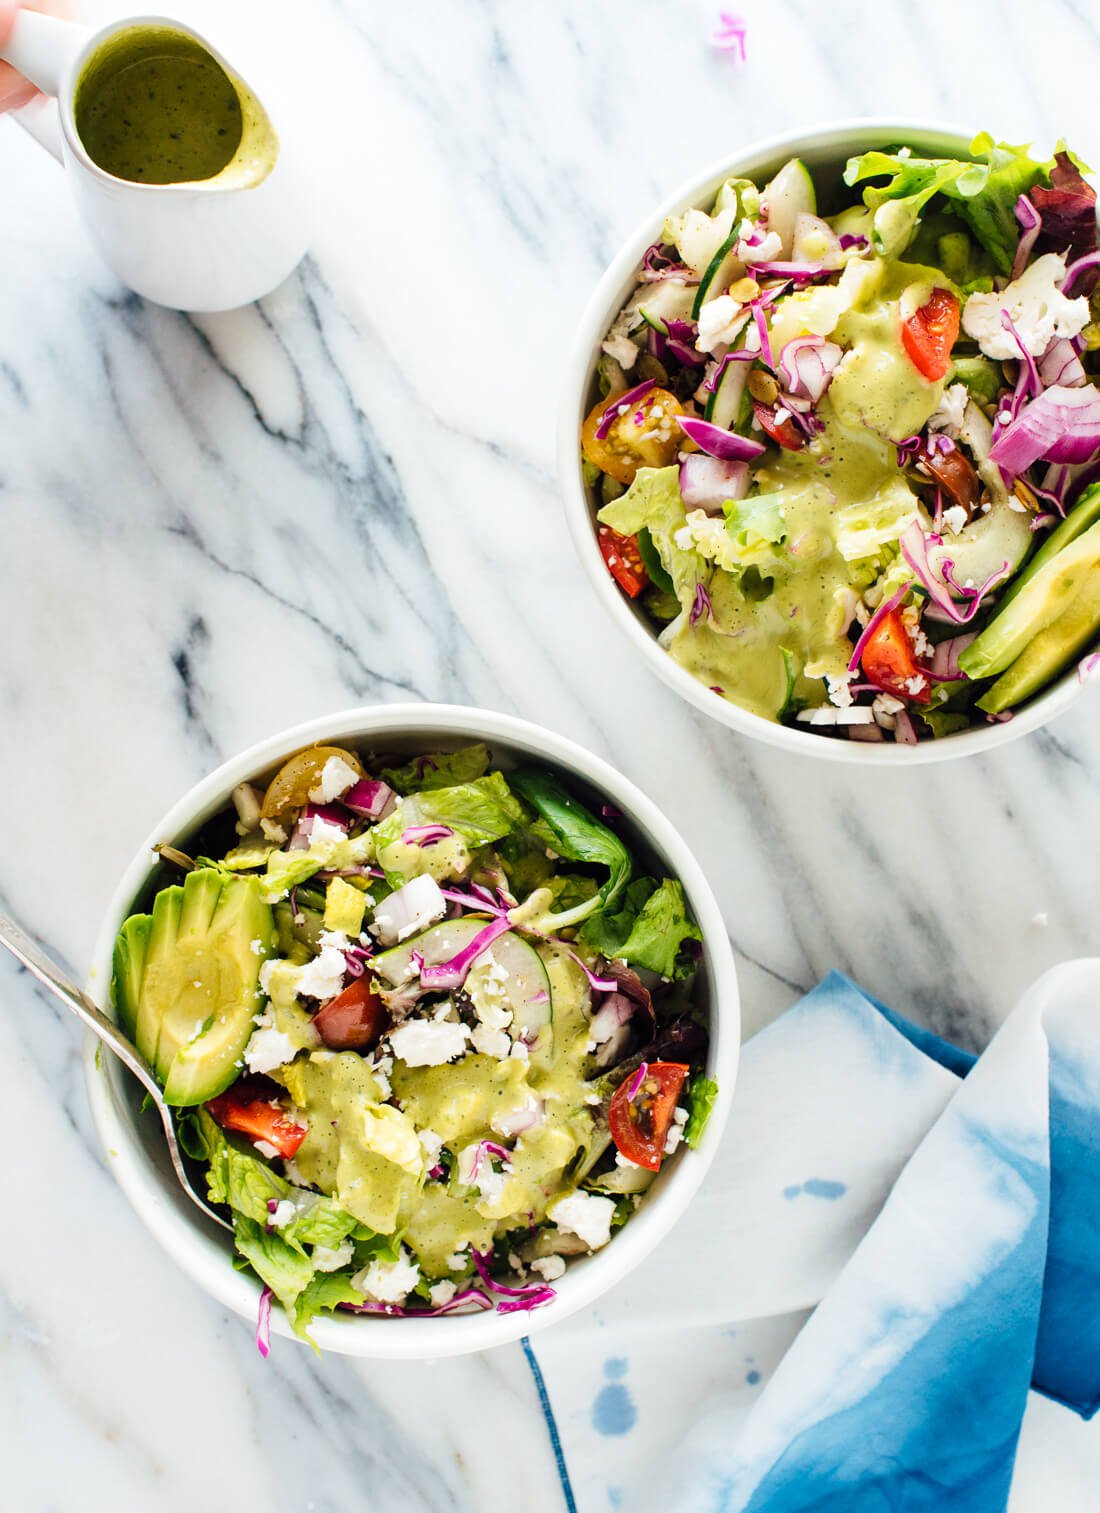 This amazing Mexican green salad recipe is the perfect healthy side for your favorite Mexican dishes! Get the recipe at cookieandkate.com